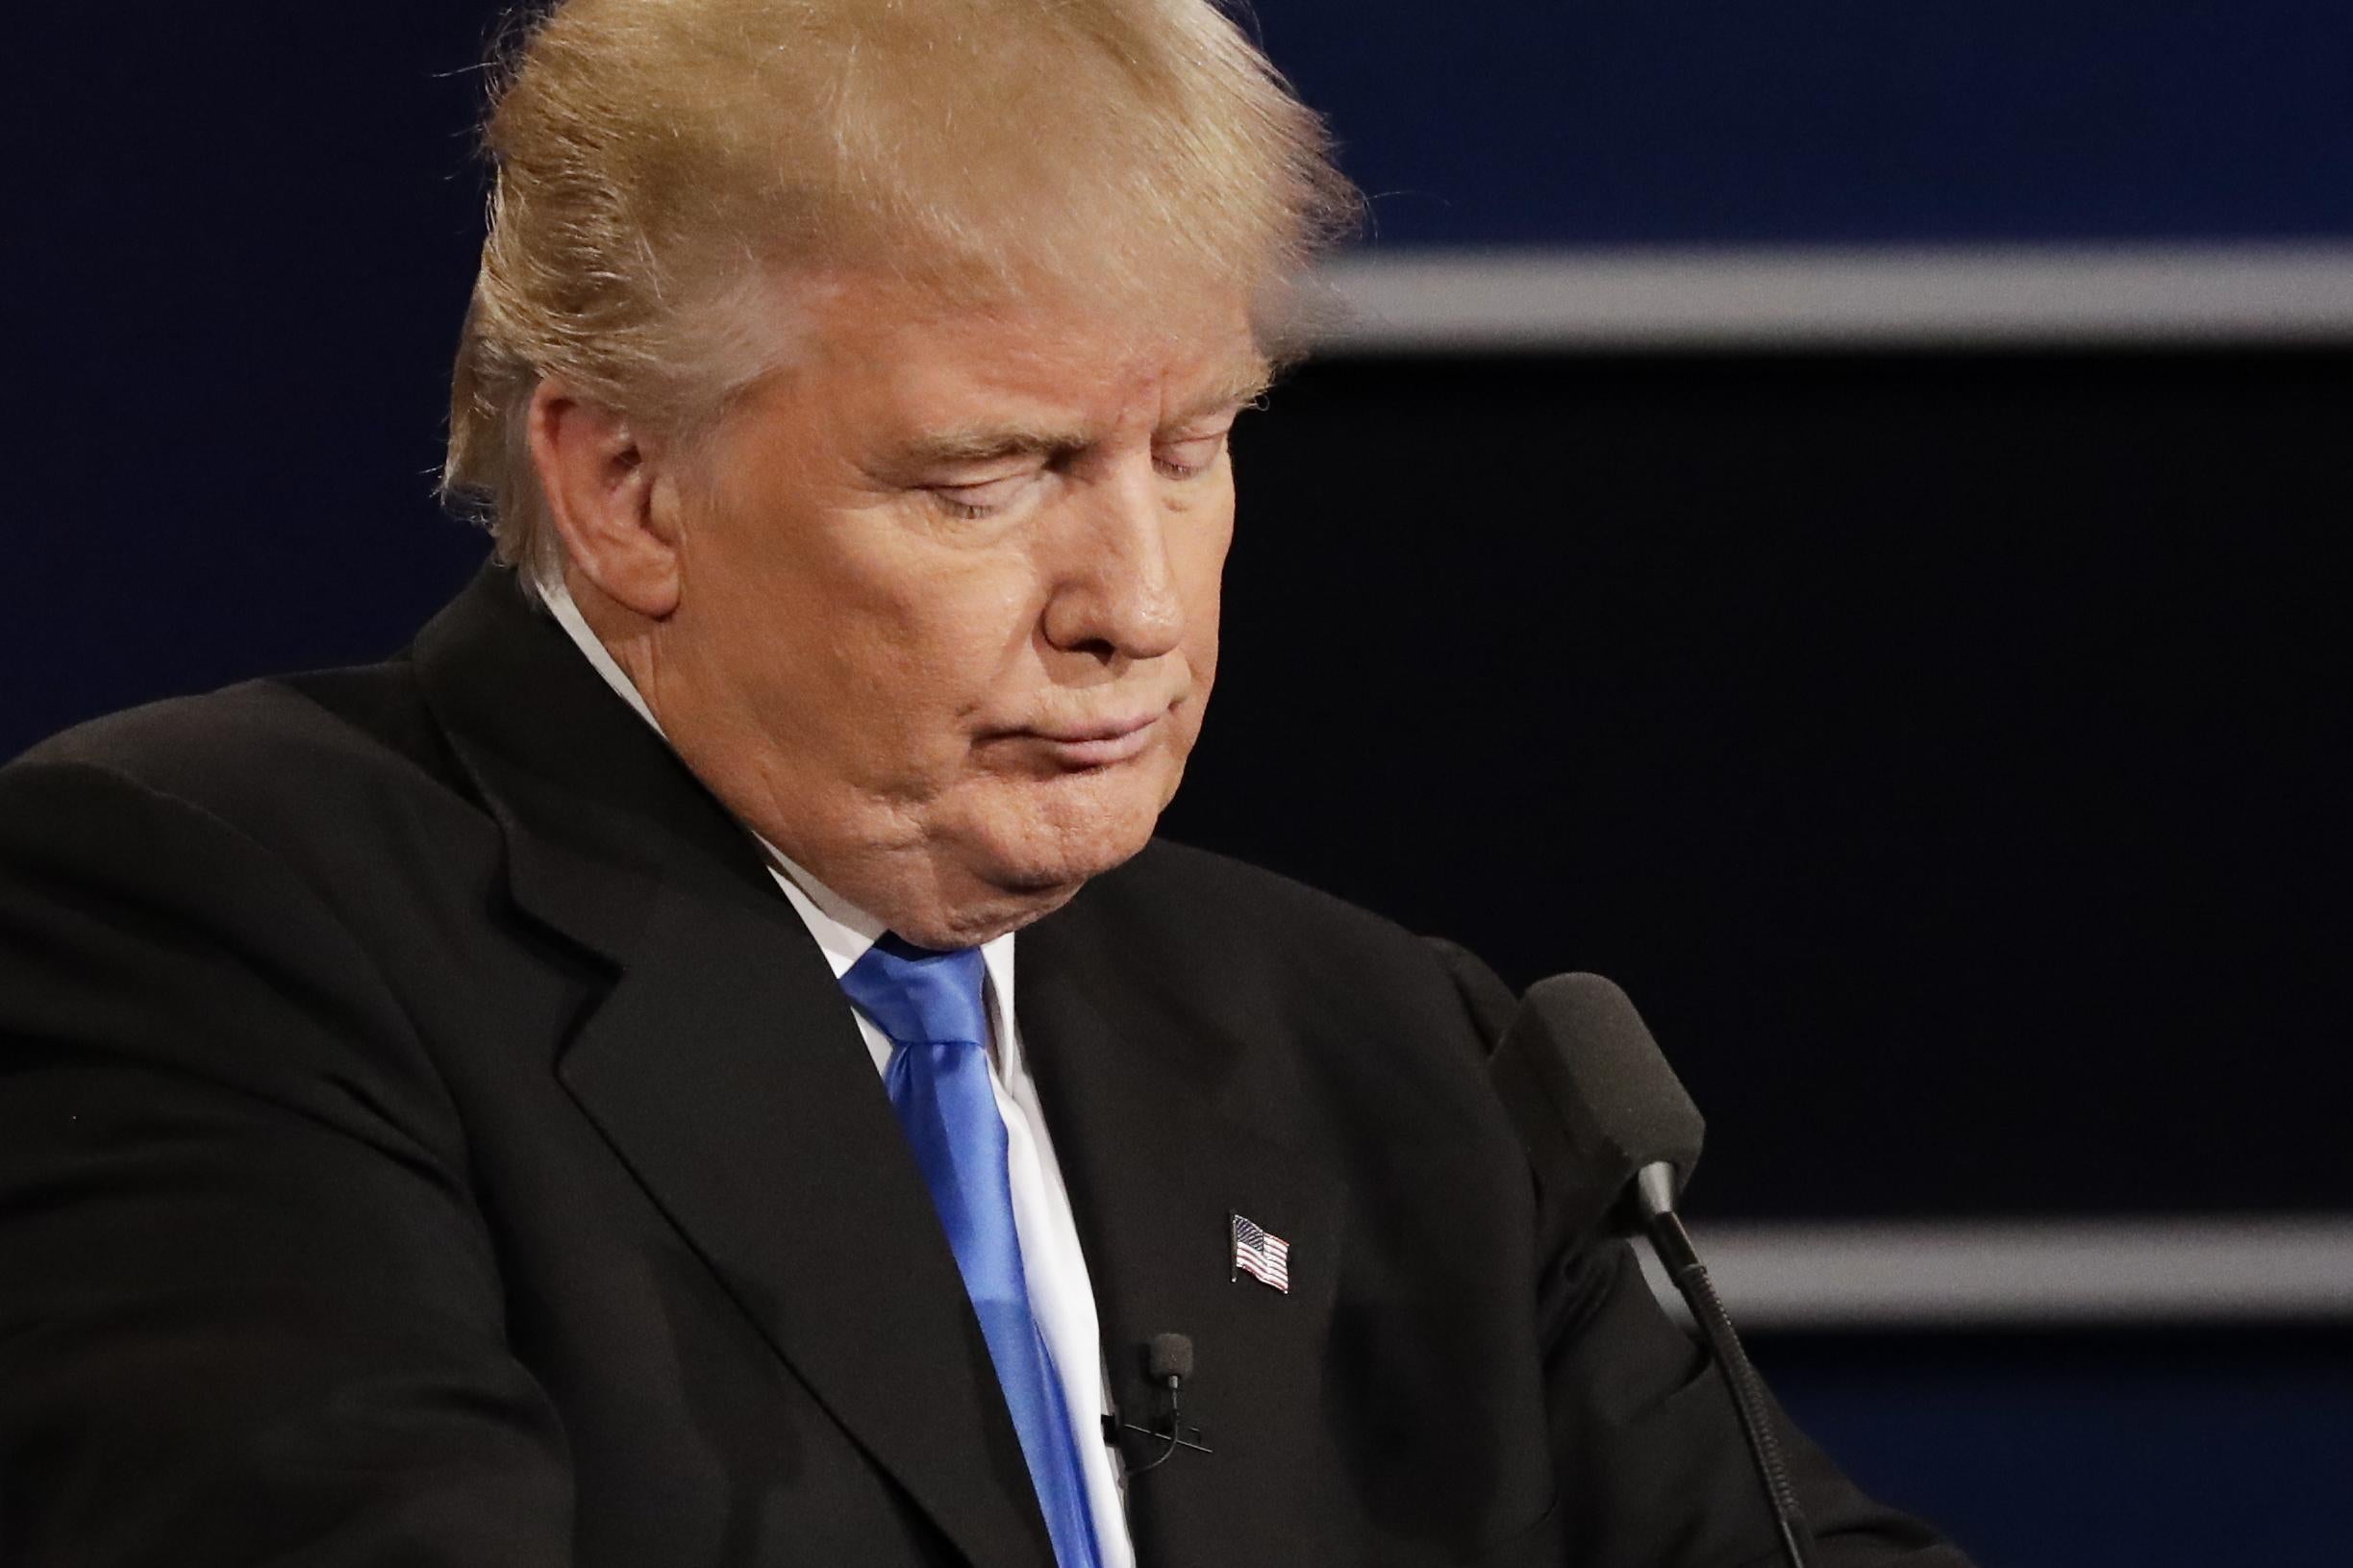 Mr Trump hinted he might give more detail at the next debate